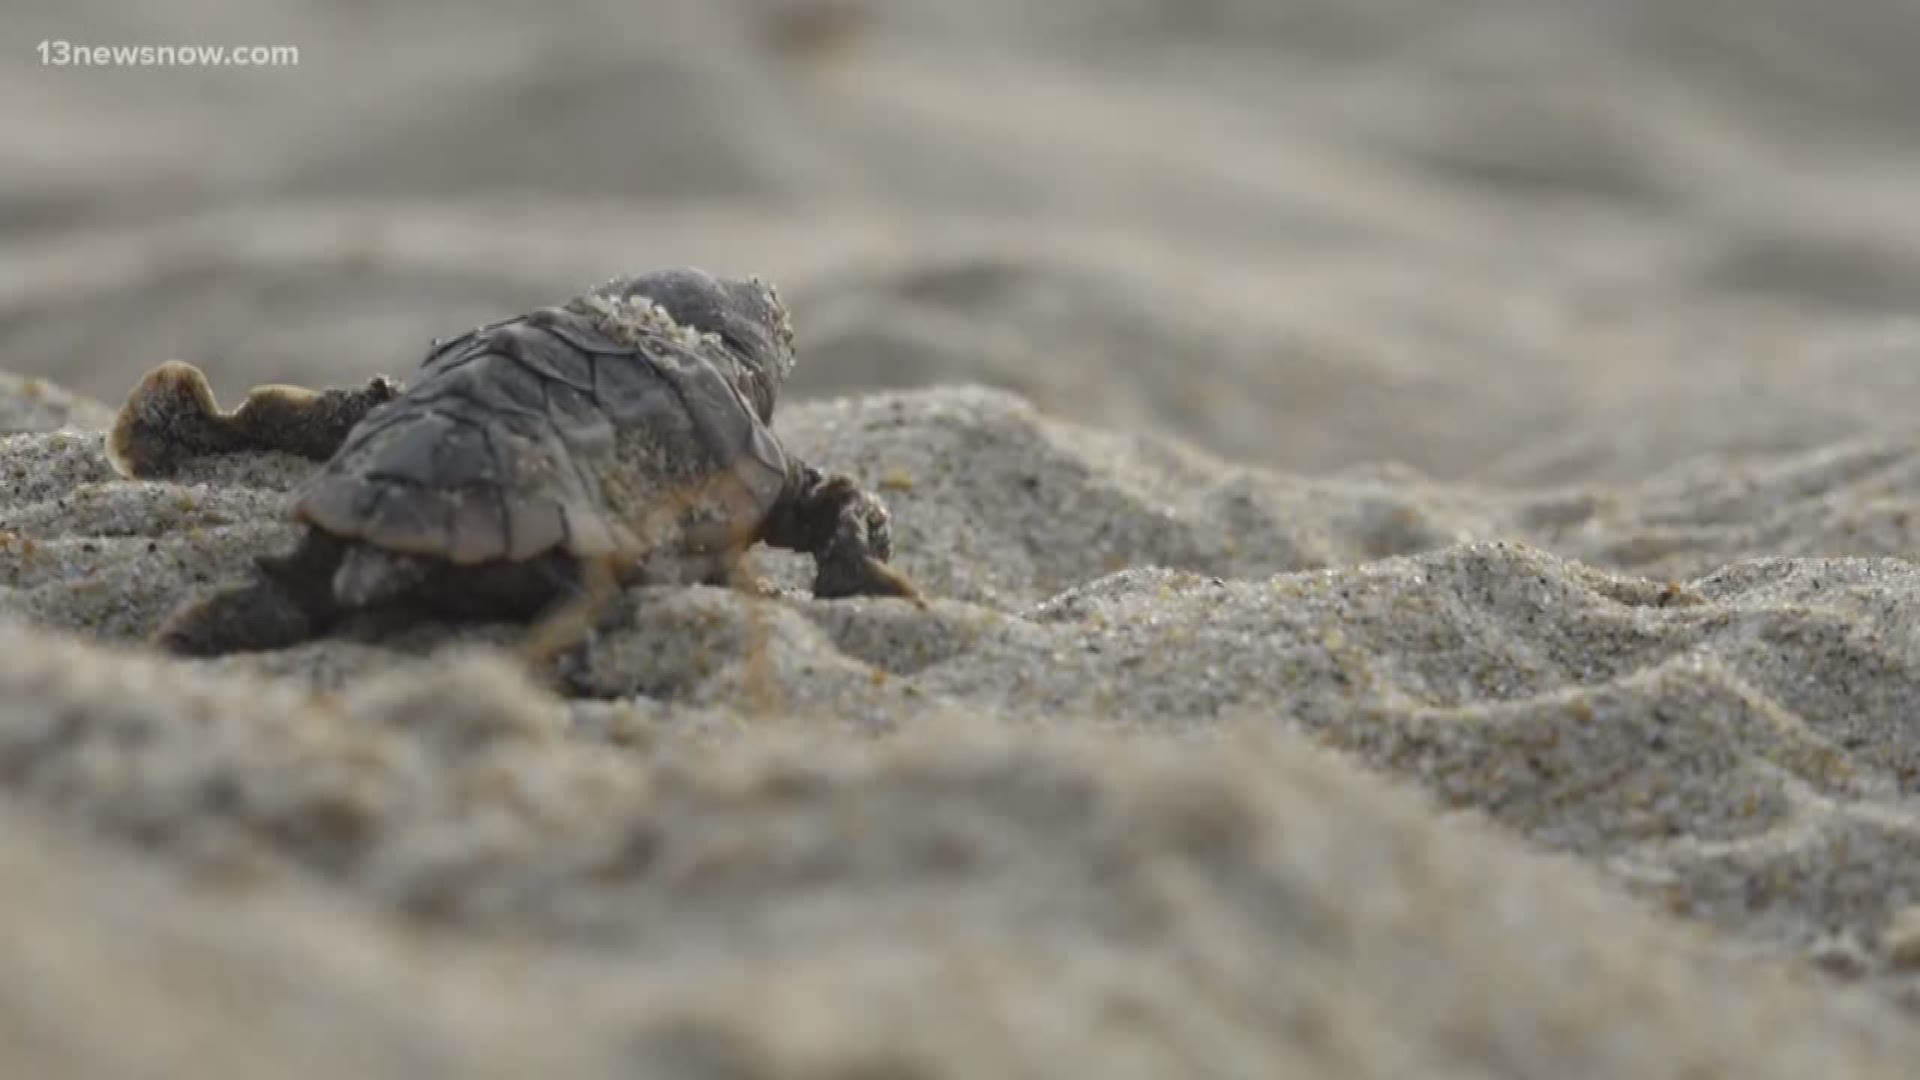 Excavating nests allows researchers to check for straggler hatchlings and learn about the nest's success rate. Research Coordinator for the Virginia Aquarium Susan Barco said there’s a lot of activity that goes on beneath the sand.